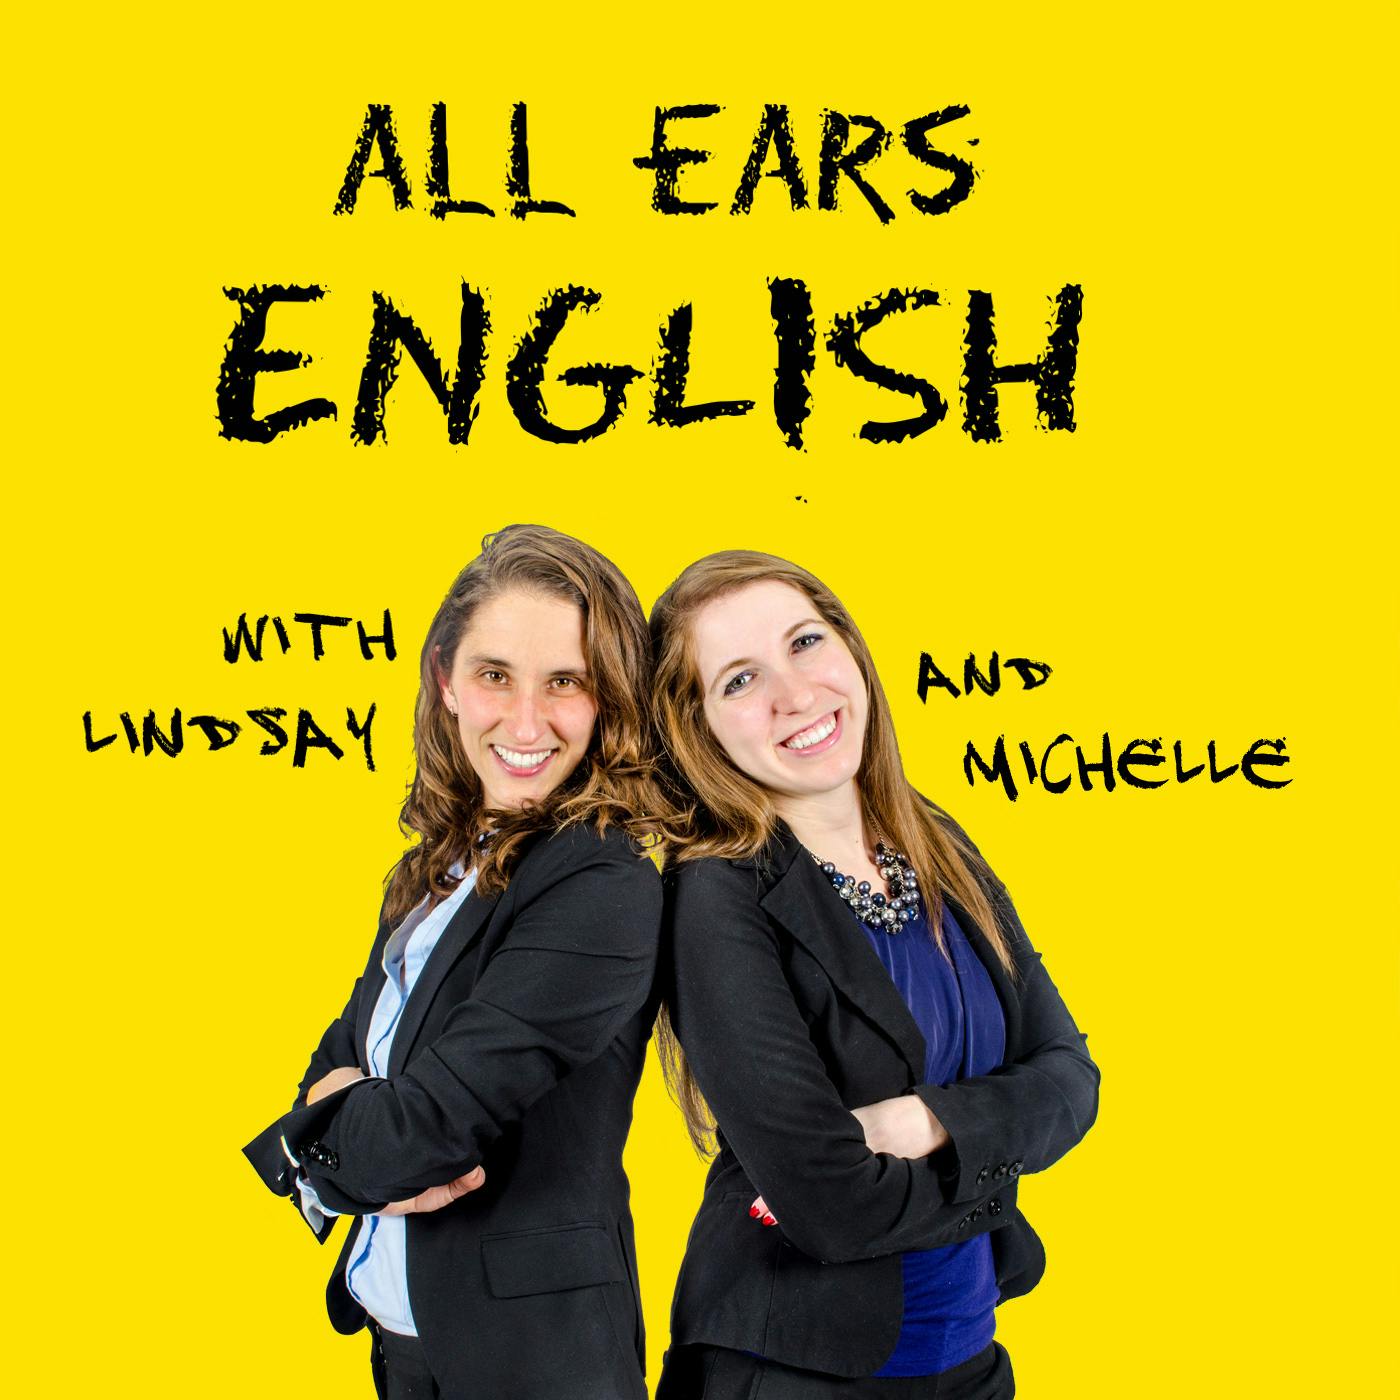 AEE 1383: Feeling Stuck with Your English? This Episode Has Your Name On It